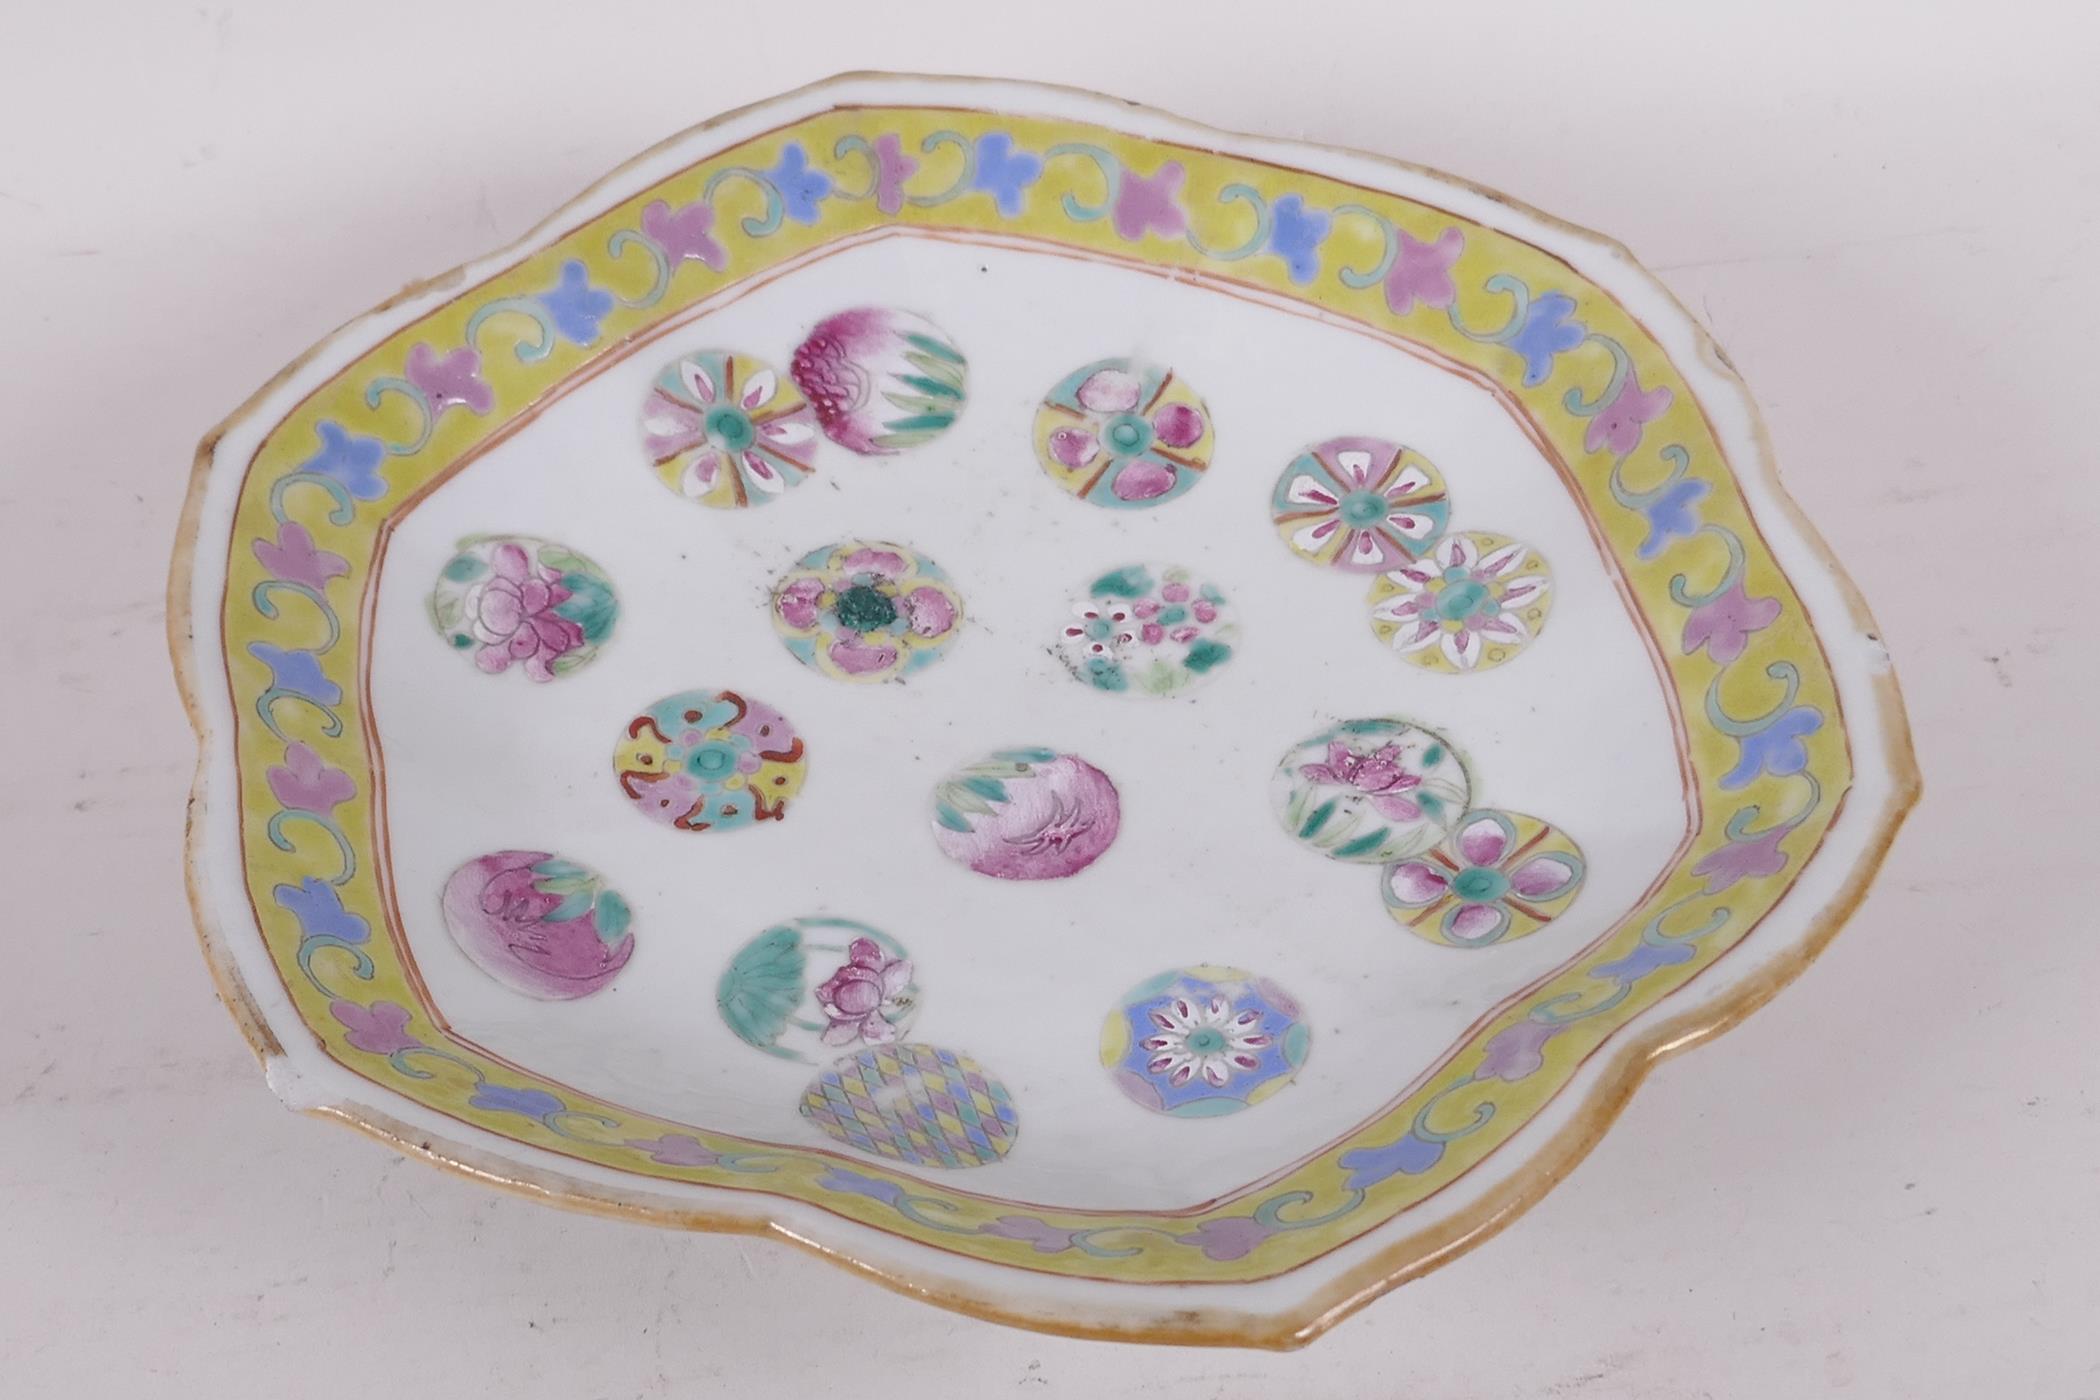 A C19th Chinese petal rimmed footed bowl painted in bright polychrome enamels, red seal mark to